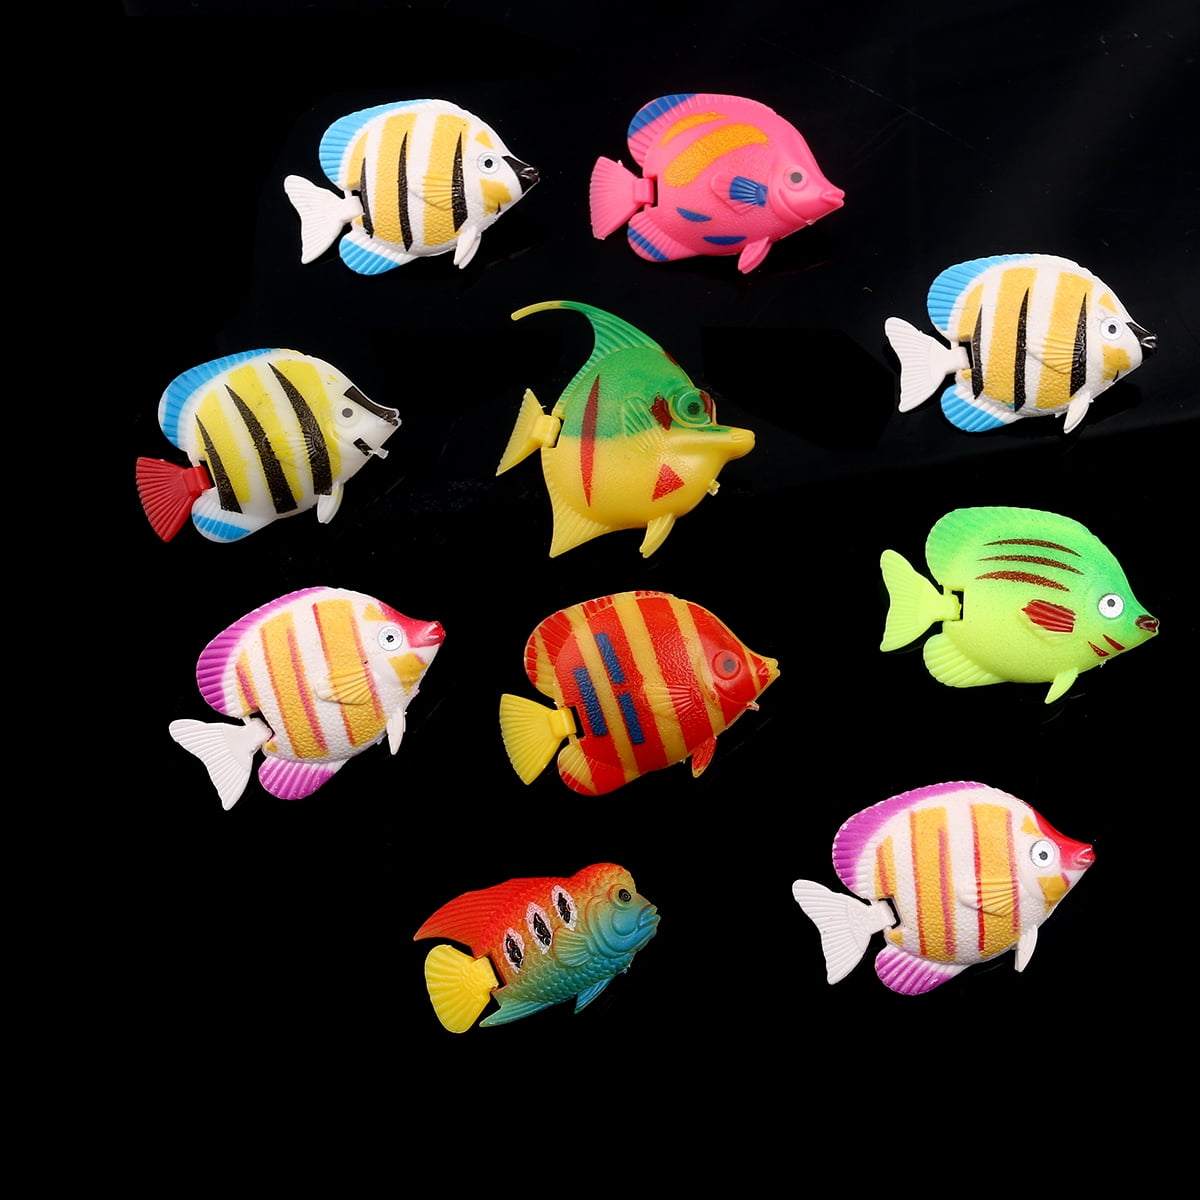 10" Tissue Tropical Fish Decorations 1-pack of 6 for sale online Fun Express 